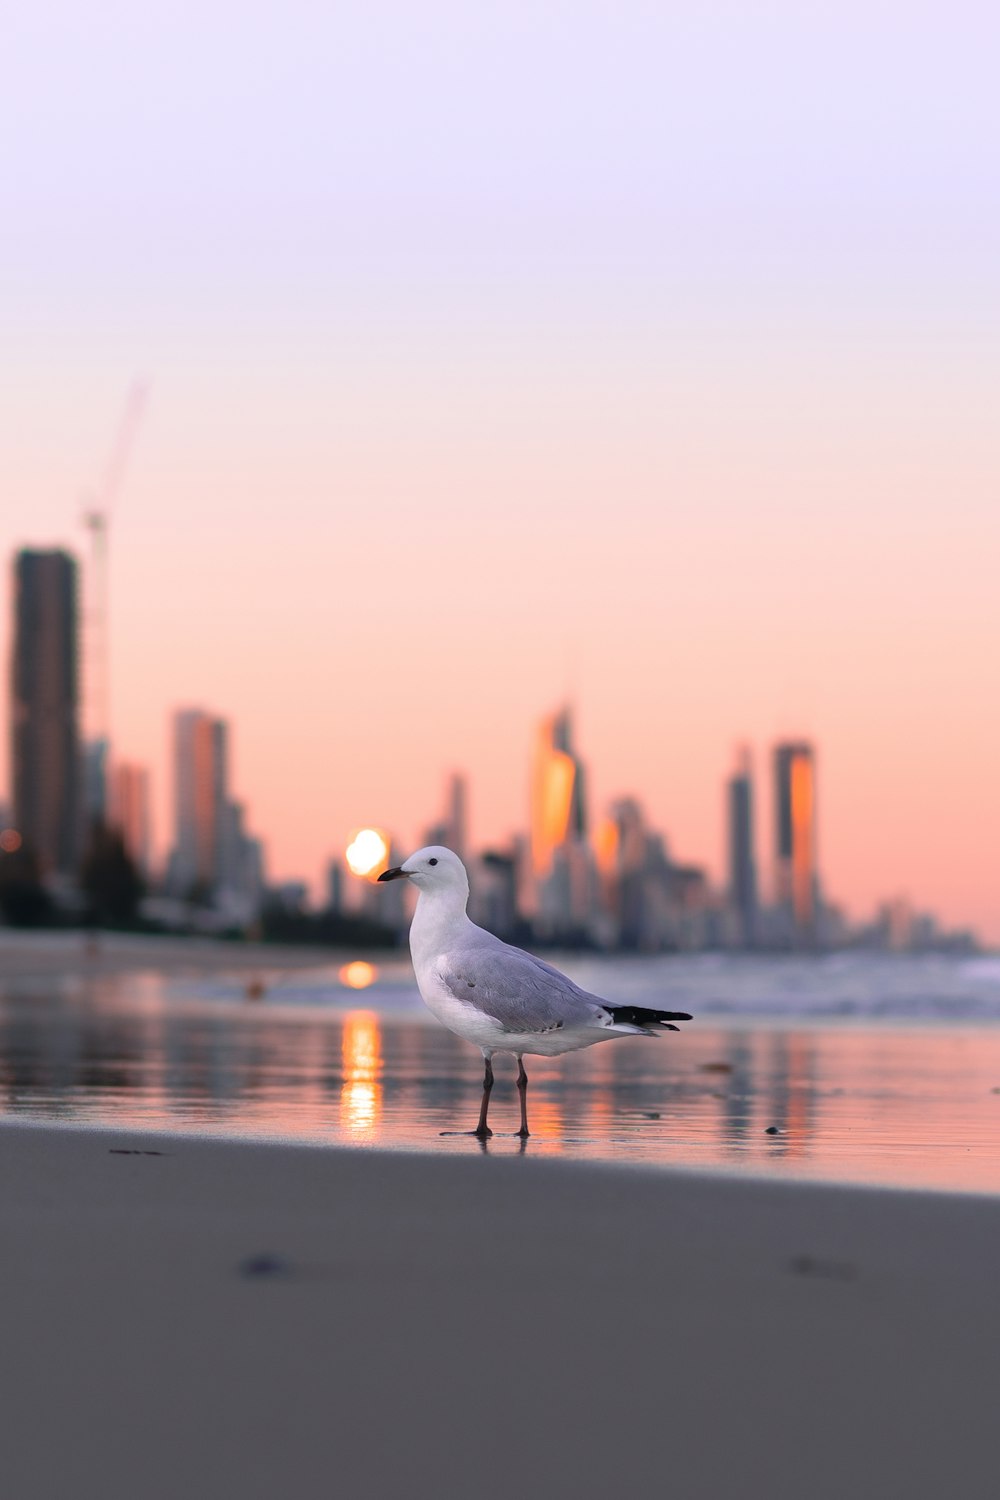 a seagull standing on the beach in front of a city skyline